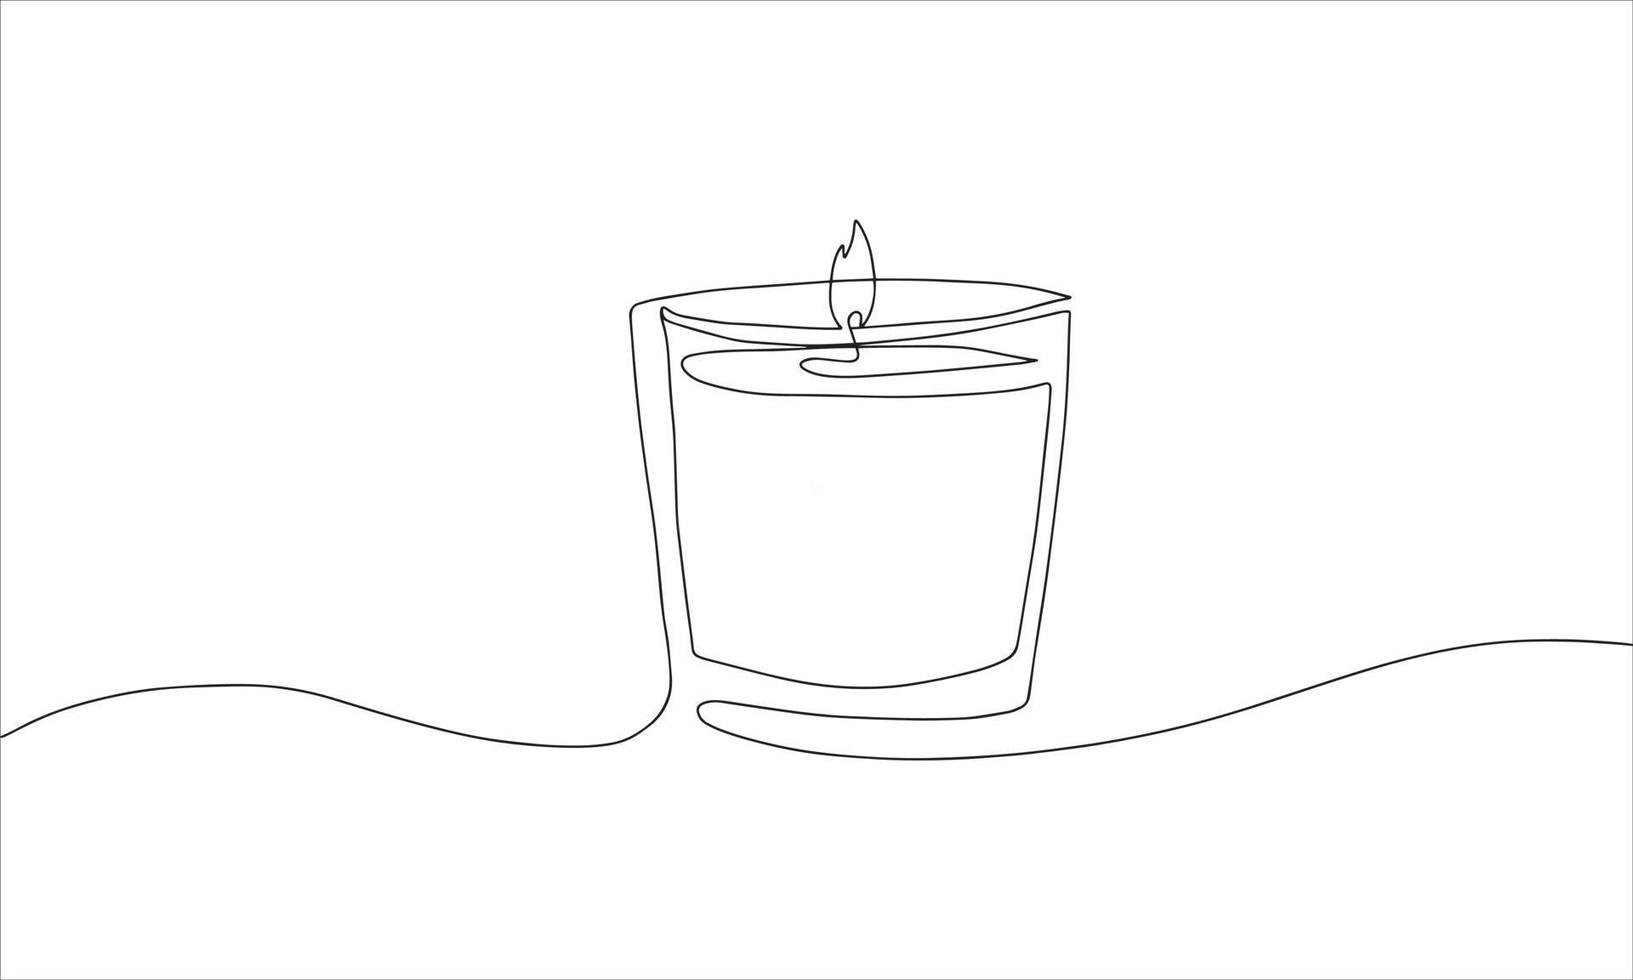 Candle in glass, one continuous line drawing. Isolated on white background.  Vector minimalist style